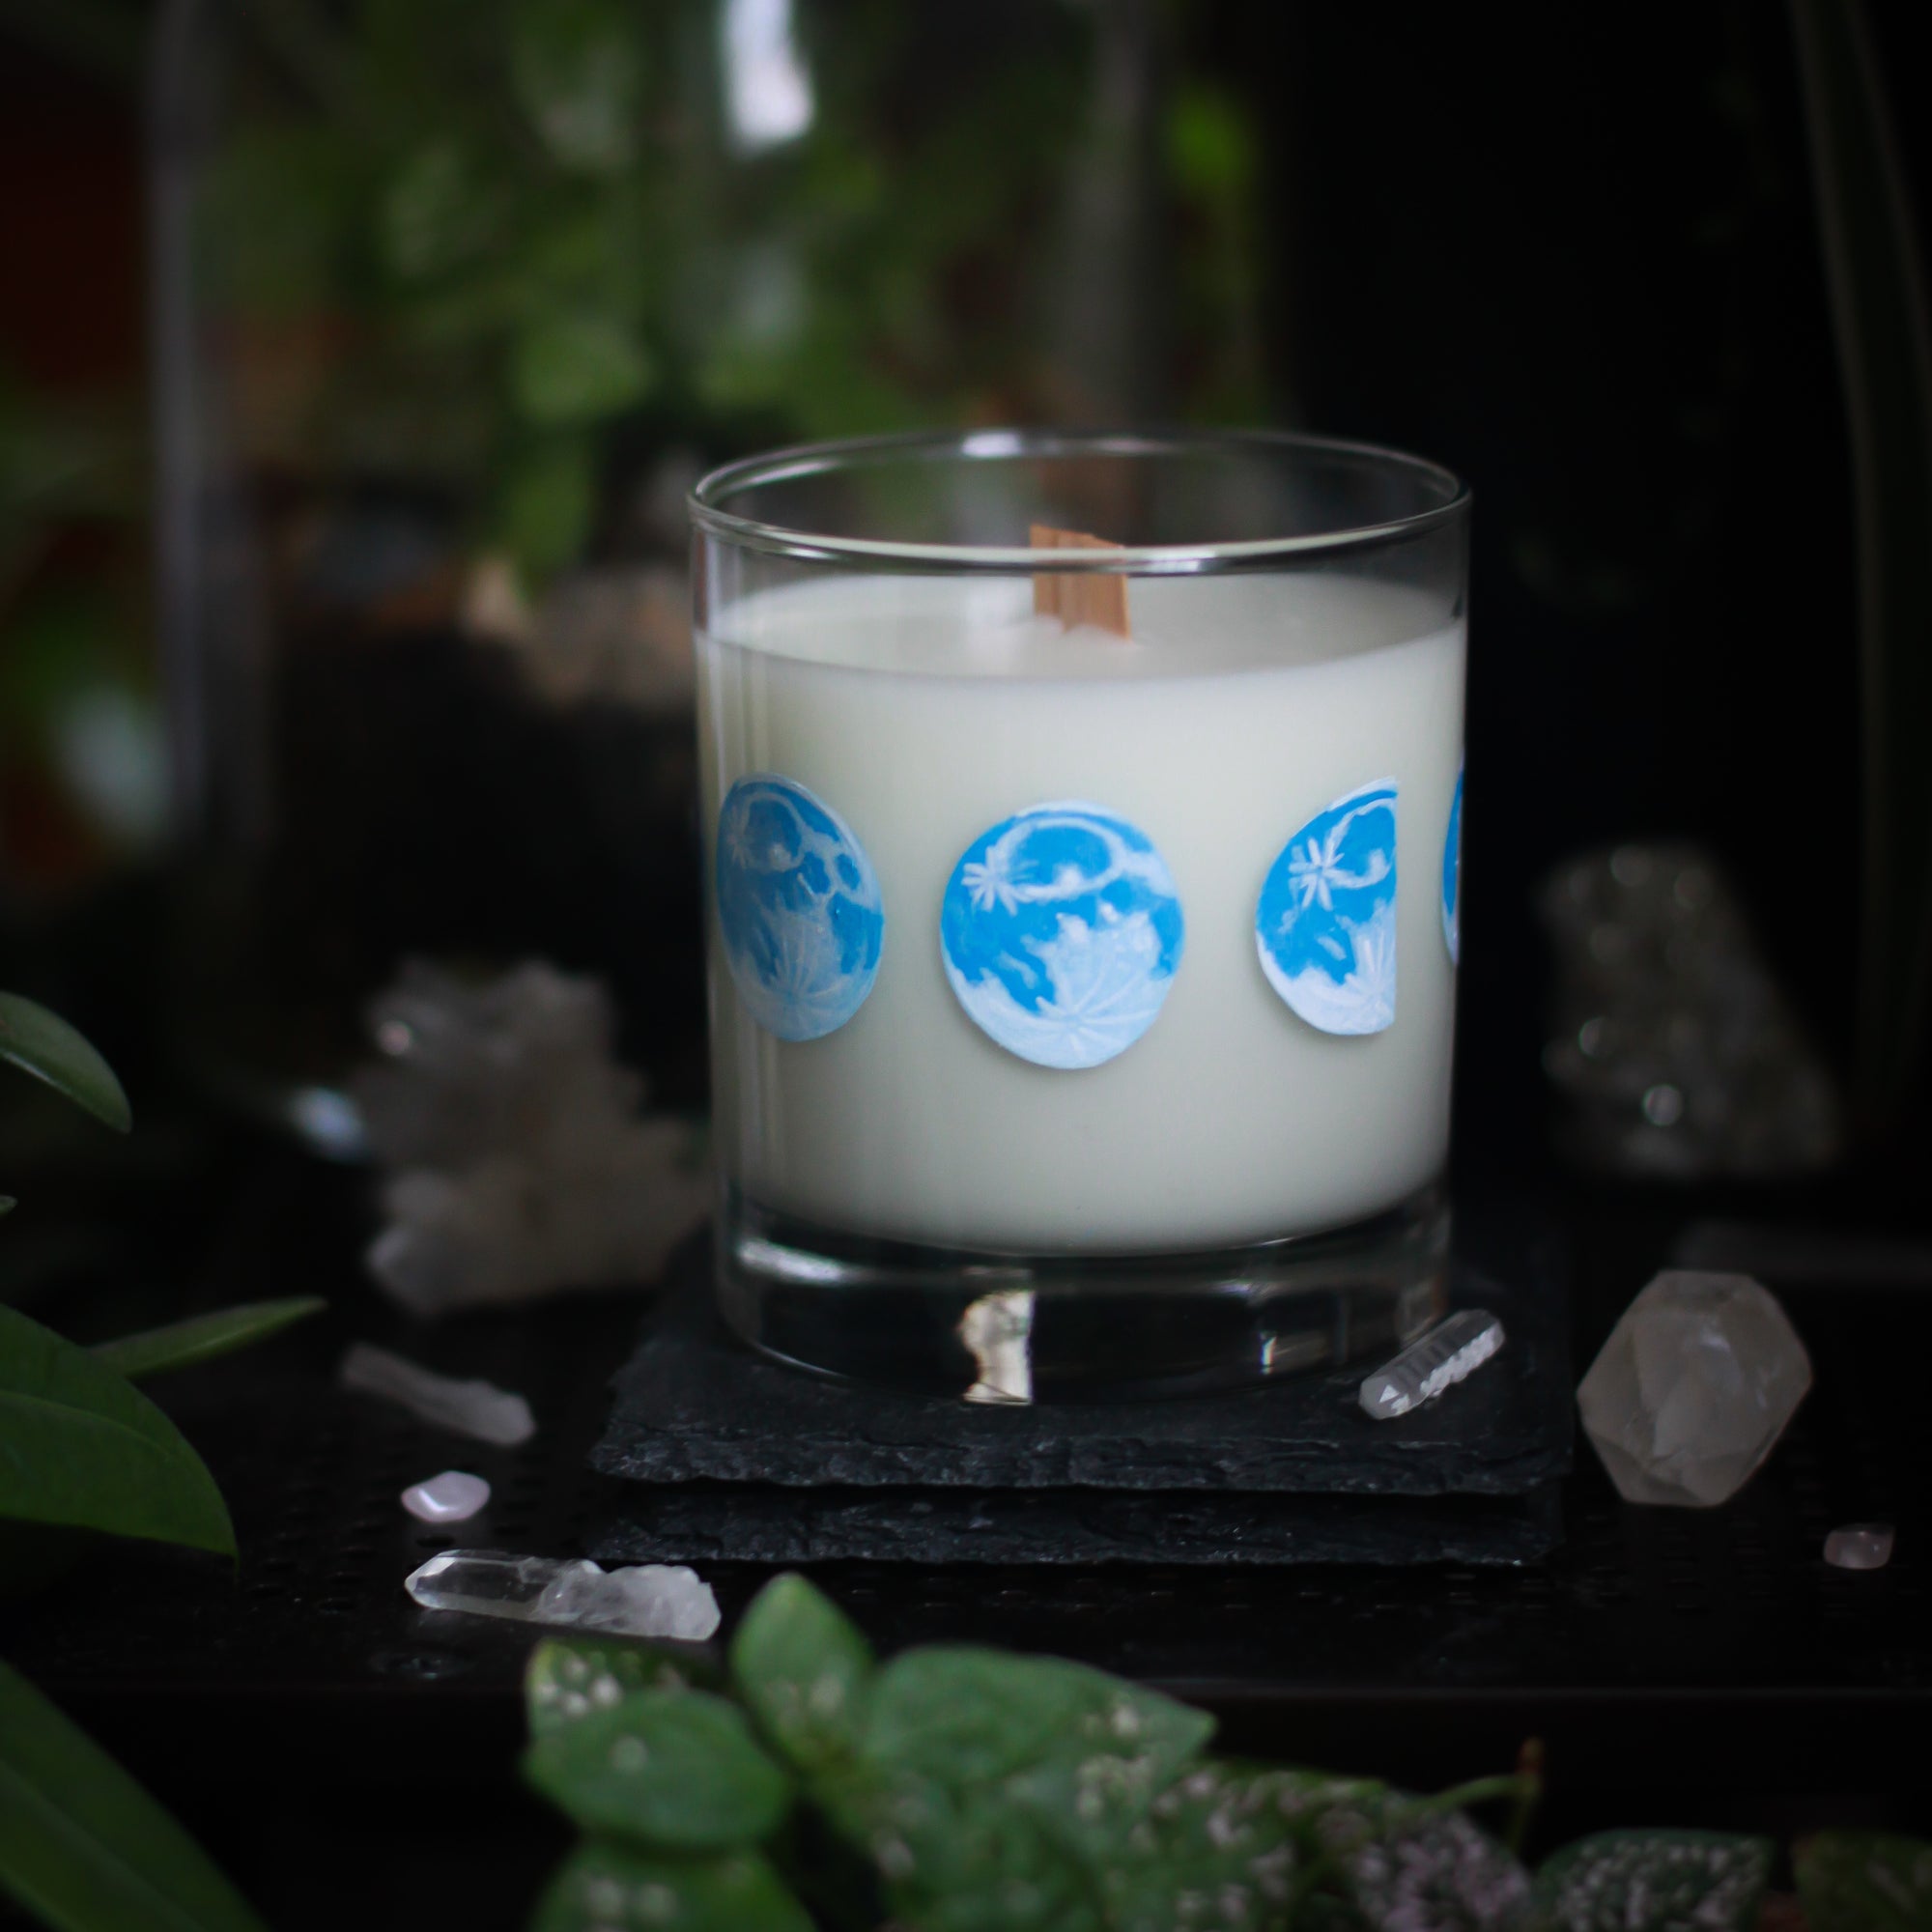 A white-wax candle with a wooden wick rests upon a dark surface with plants and crystals visible in the scene. The light candle stands out in contrast against the dark background. The candle glass has 8 phases of the moon painted in shades of blue circling the glass. This angle depicts the full moon with two 3 quarter moons on either side of it.